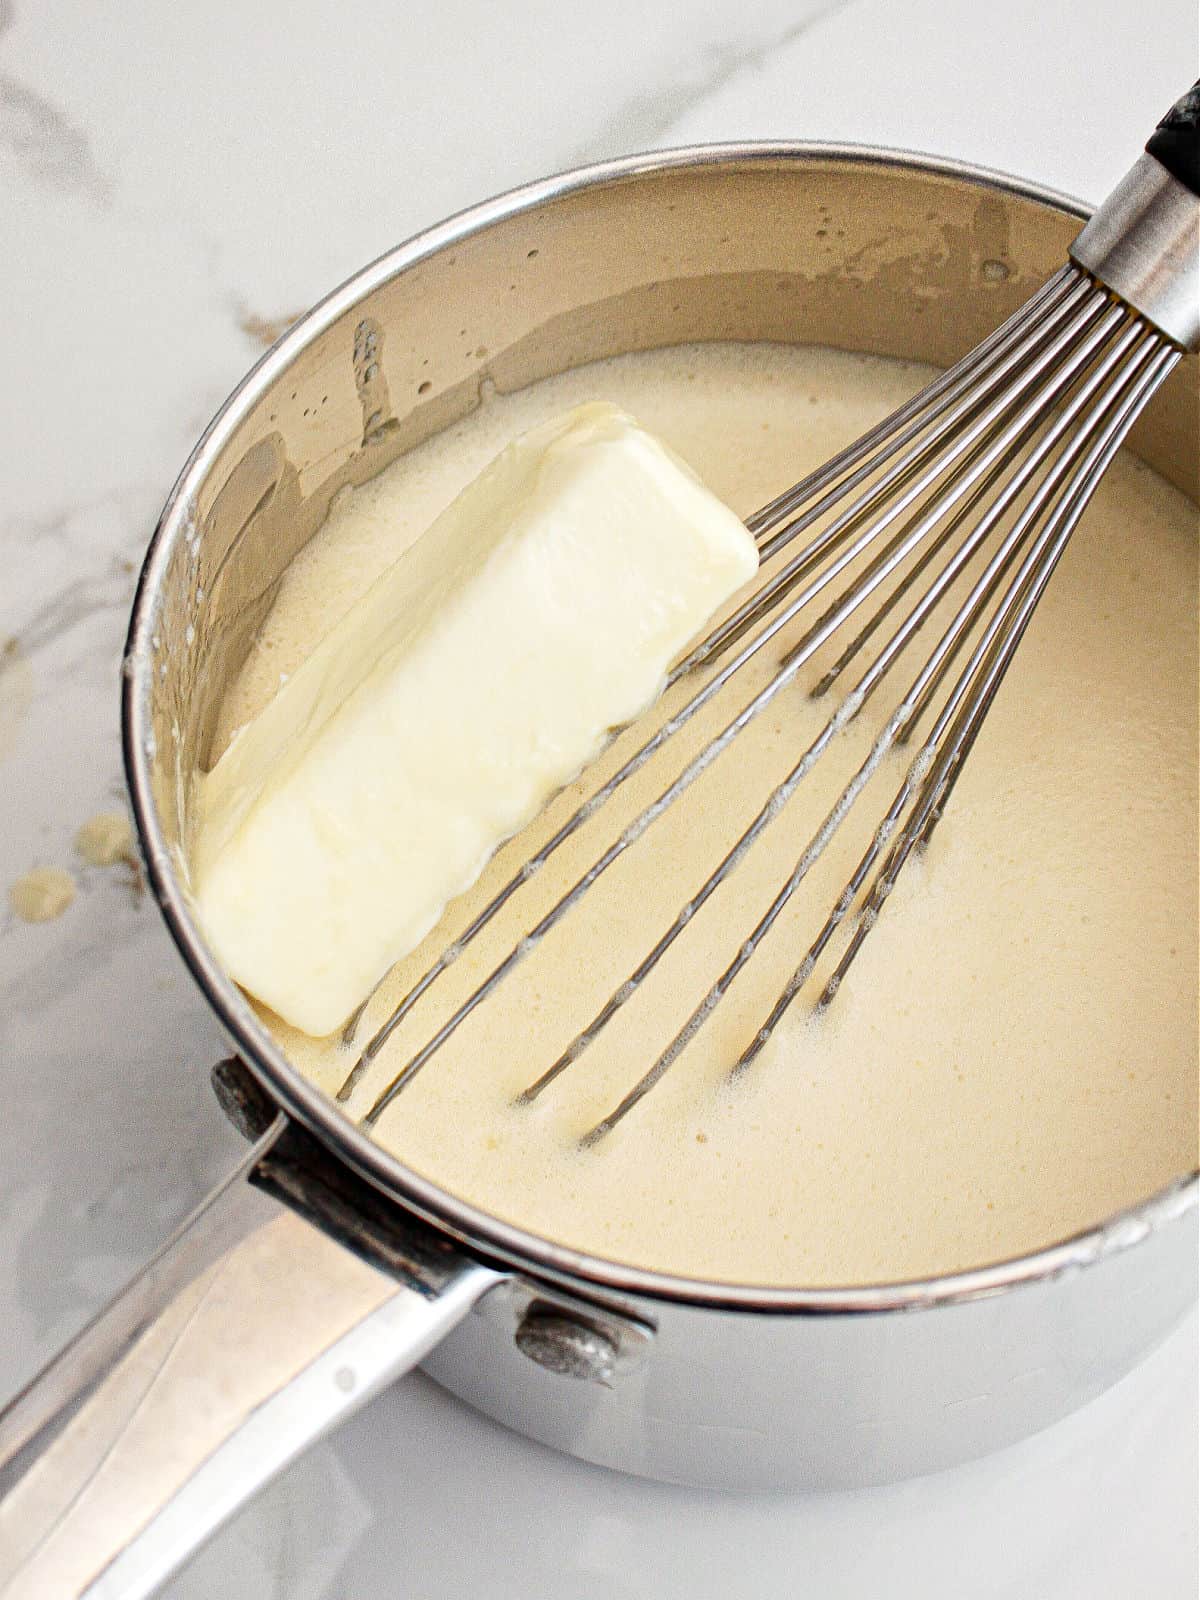 Butter added to a metal saucepan with a custard mixture and a whisk. White background.